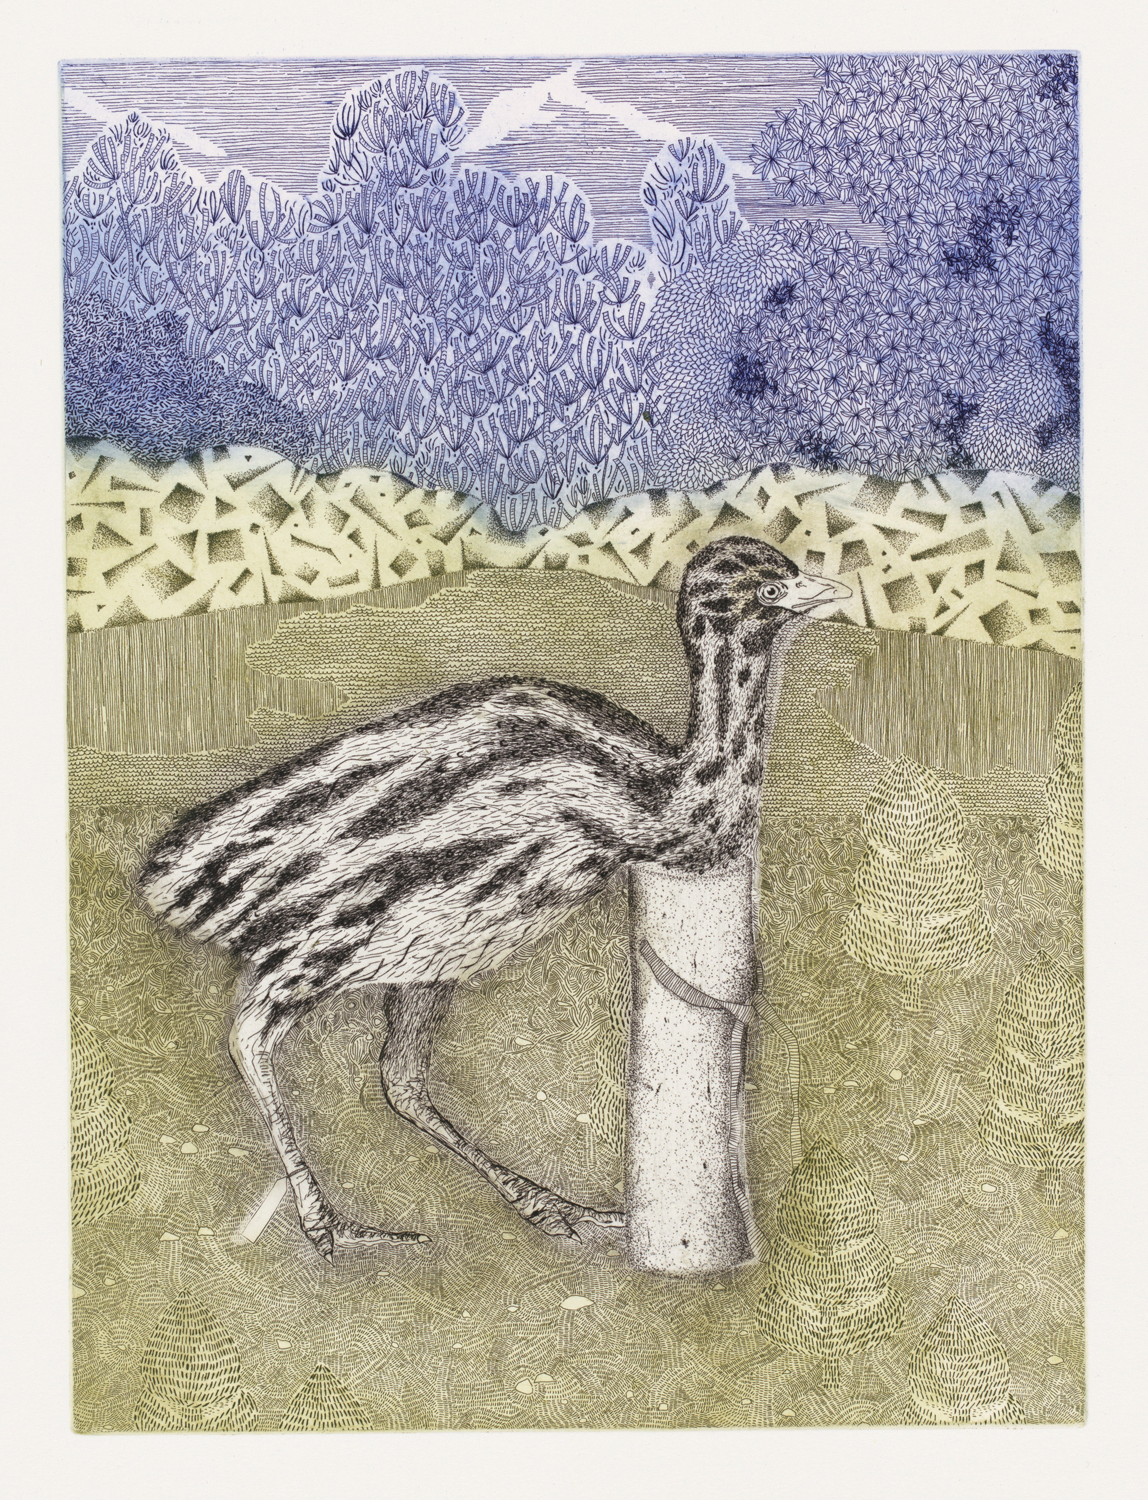  Gracia Haby &amp; Louise Jennison,  Grande Perspective in the memory of a swan , etching with hand-colouring. Image drawn directly on to the copper plate by the Artists and processed, proofed and printed in an edition of 20 (plus proofs), in three c